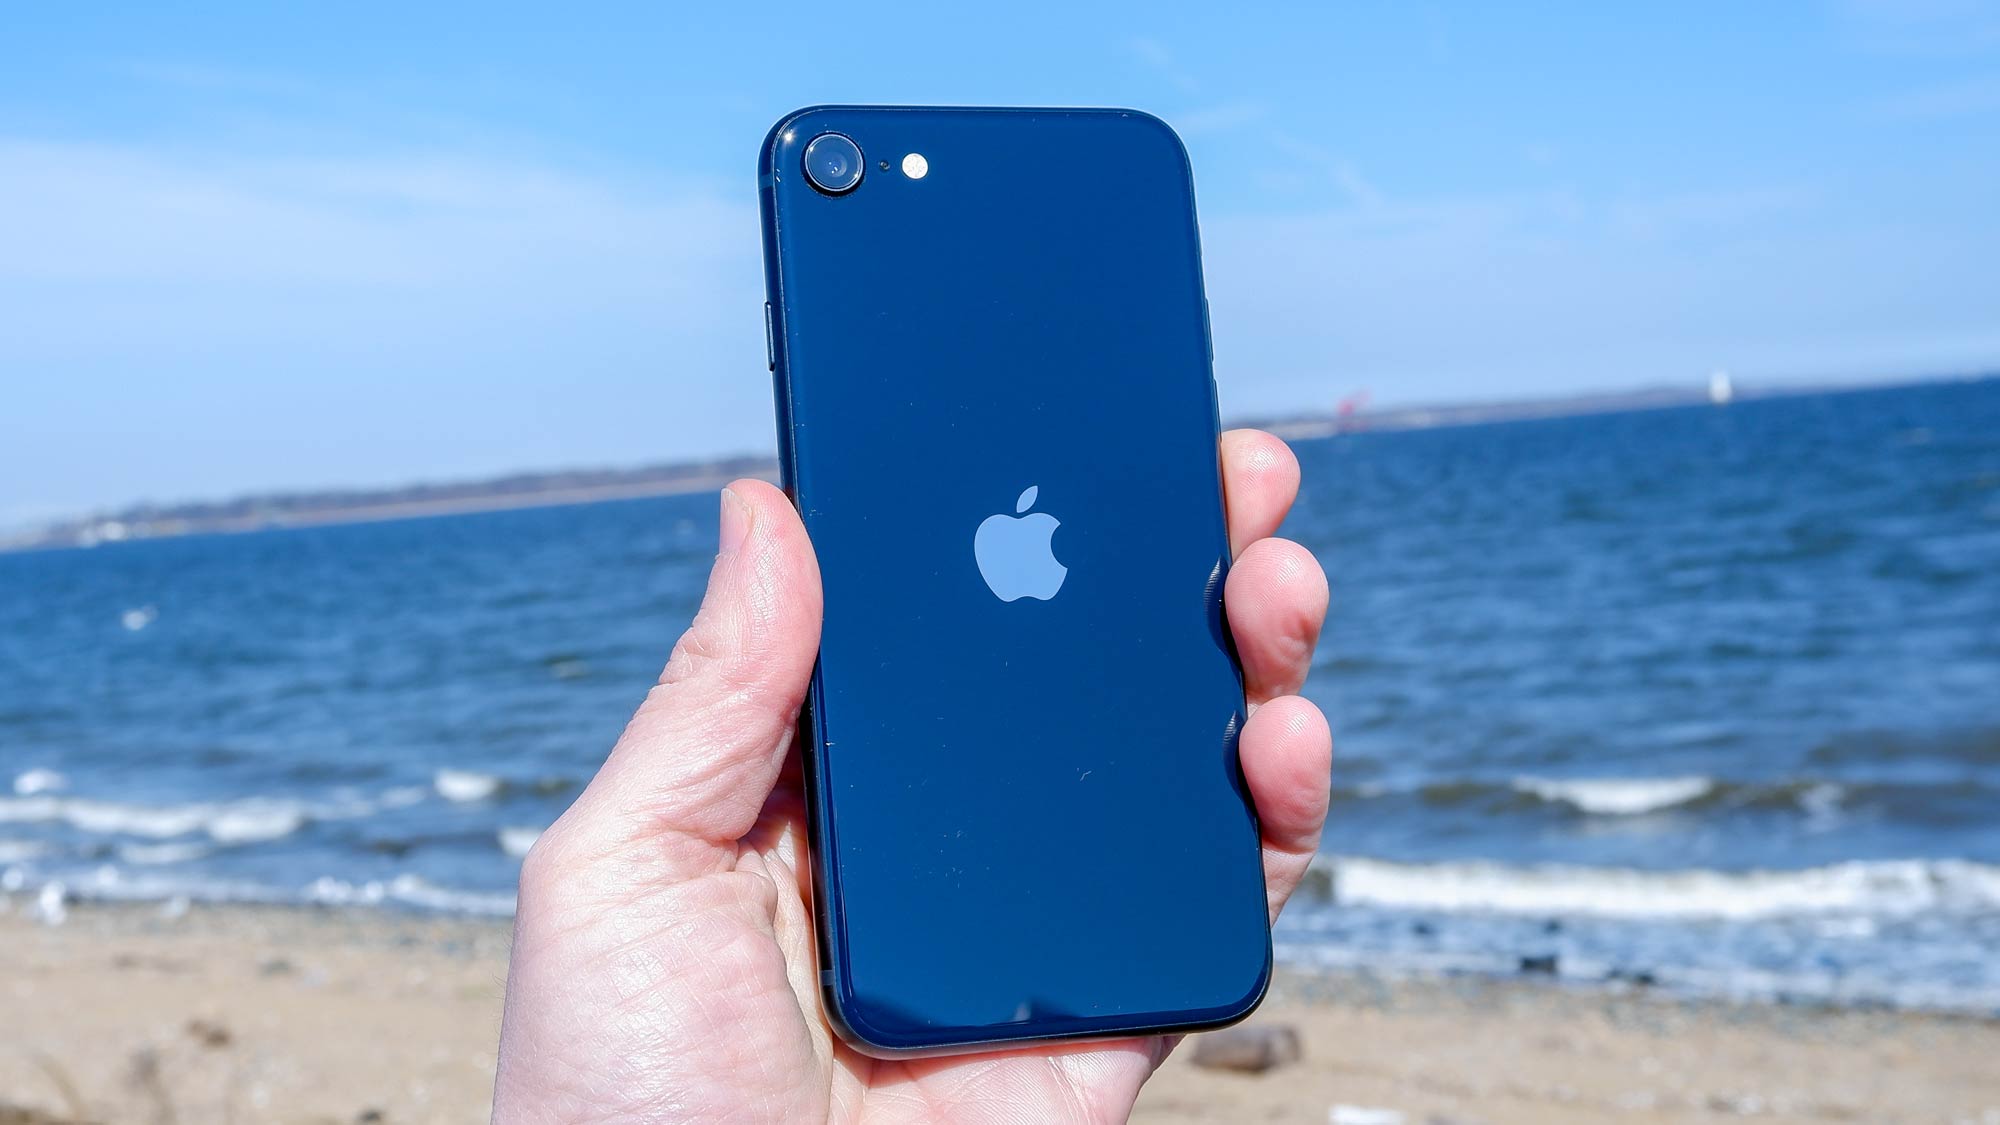 iPhone SE 2022 The phone appeared in hand on the beach